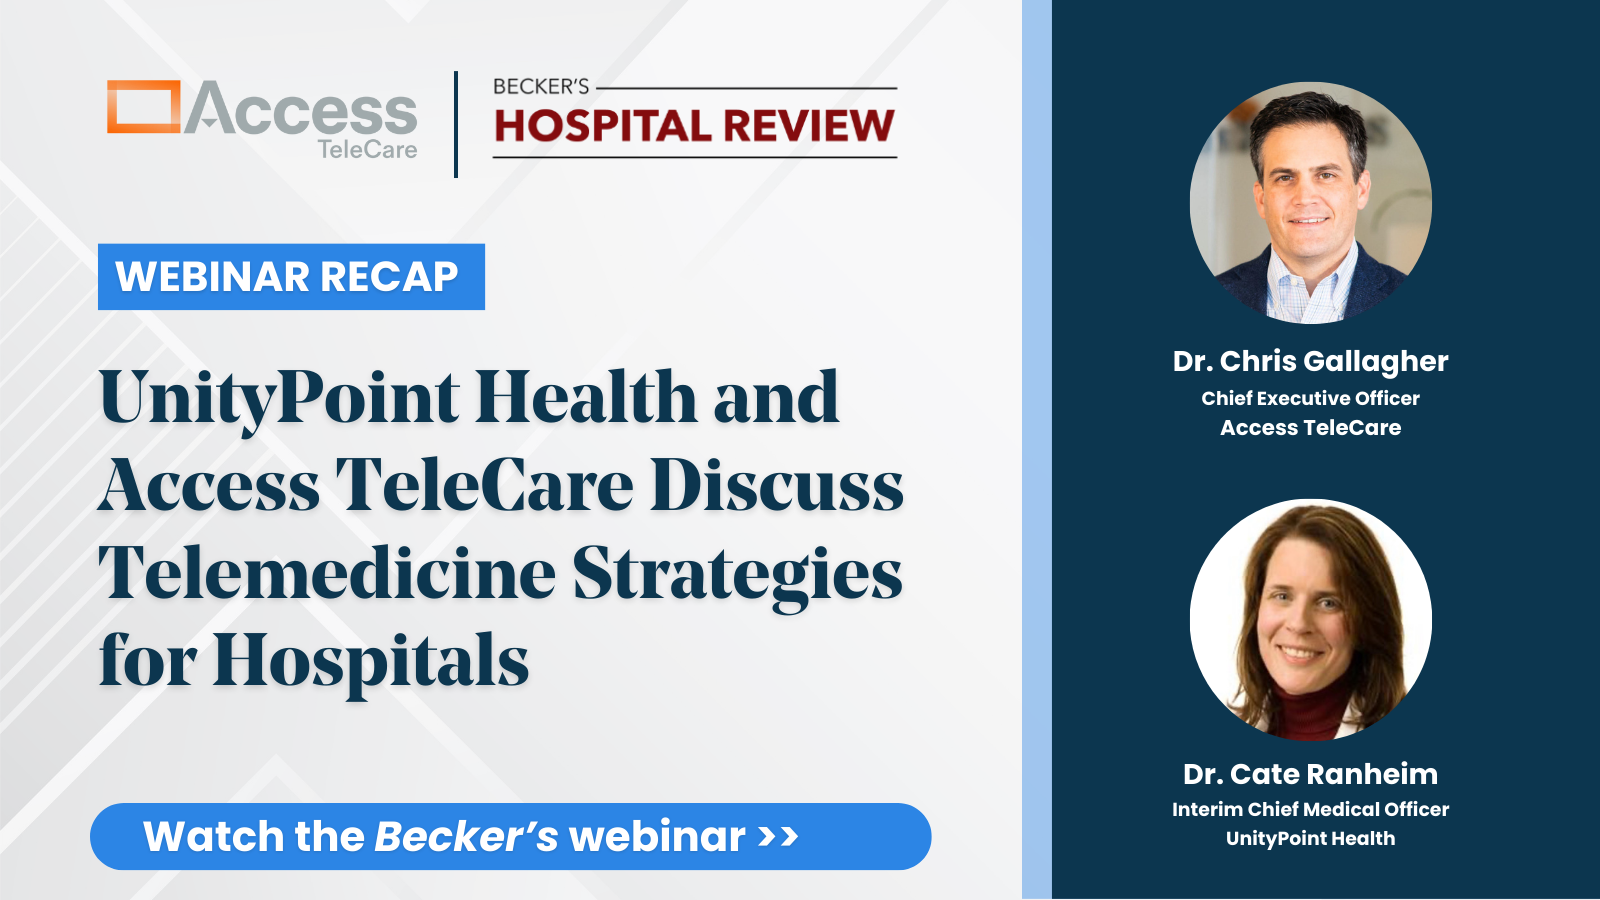 Title for Access TeleCare and UnityPoint Health Becker's Webinar with images of Dr. Chris Gallagher and Dr. Cate Ranheim